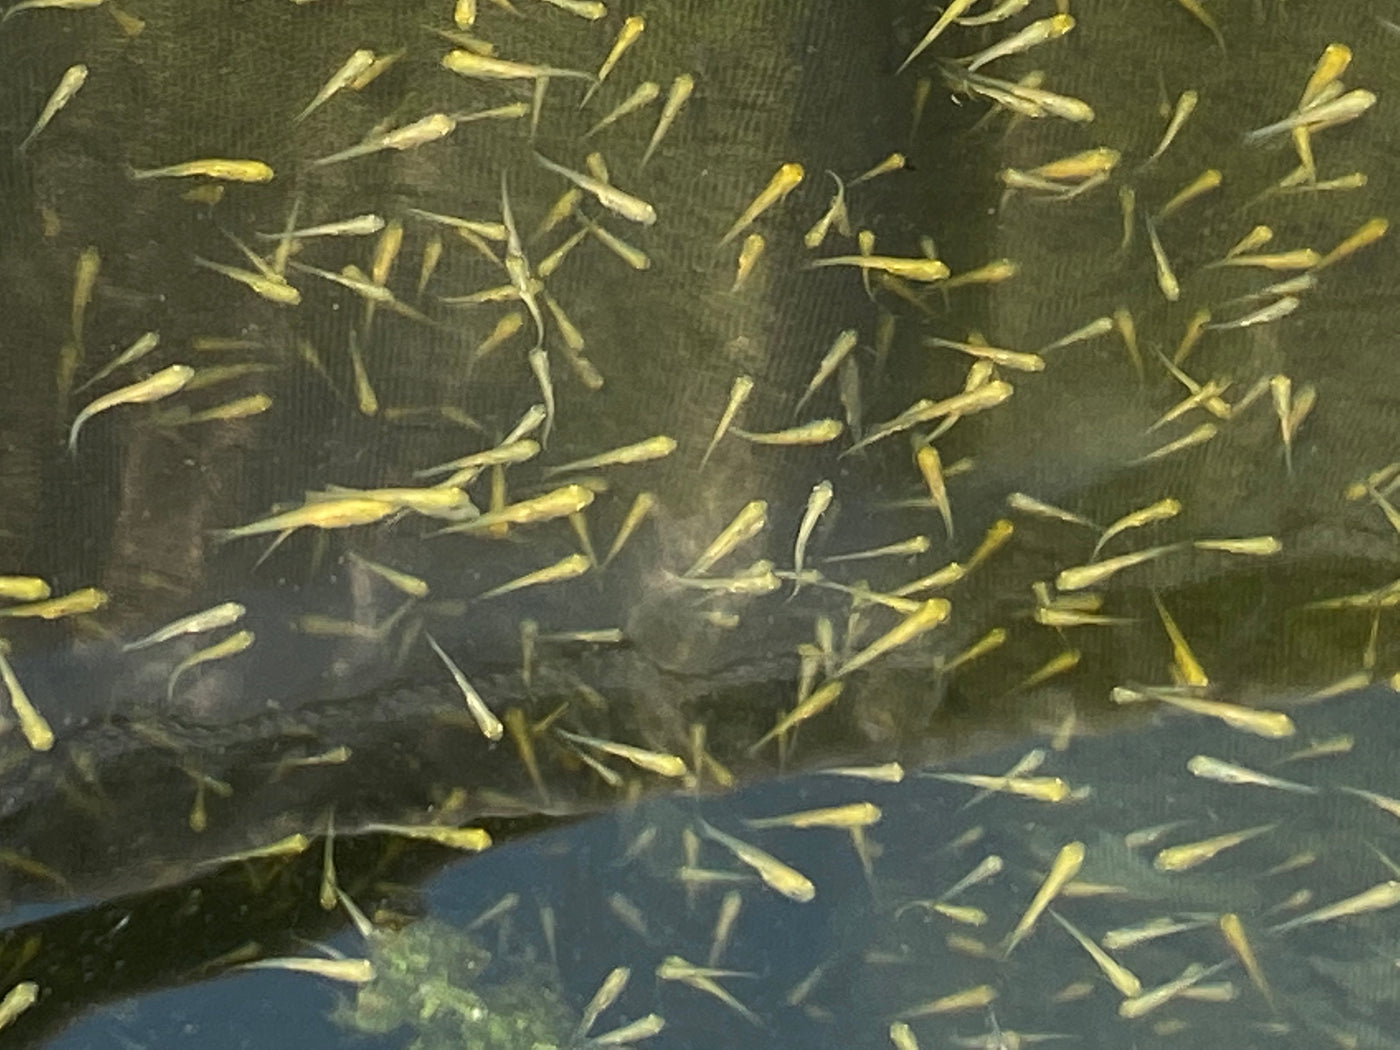 An underwater picture of a shoal of koi carp fry